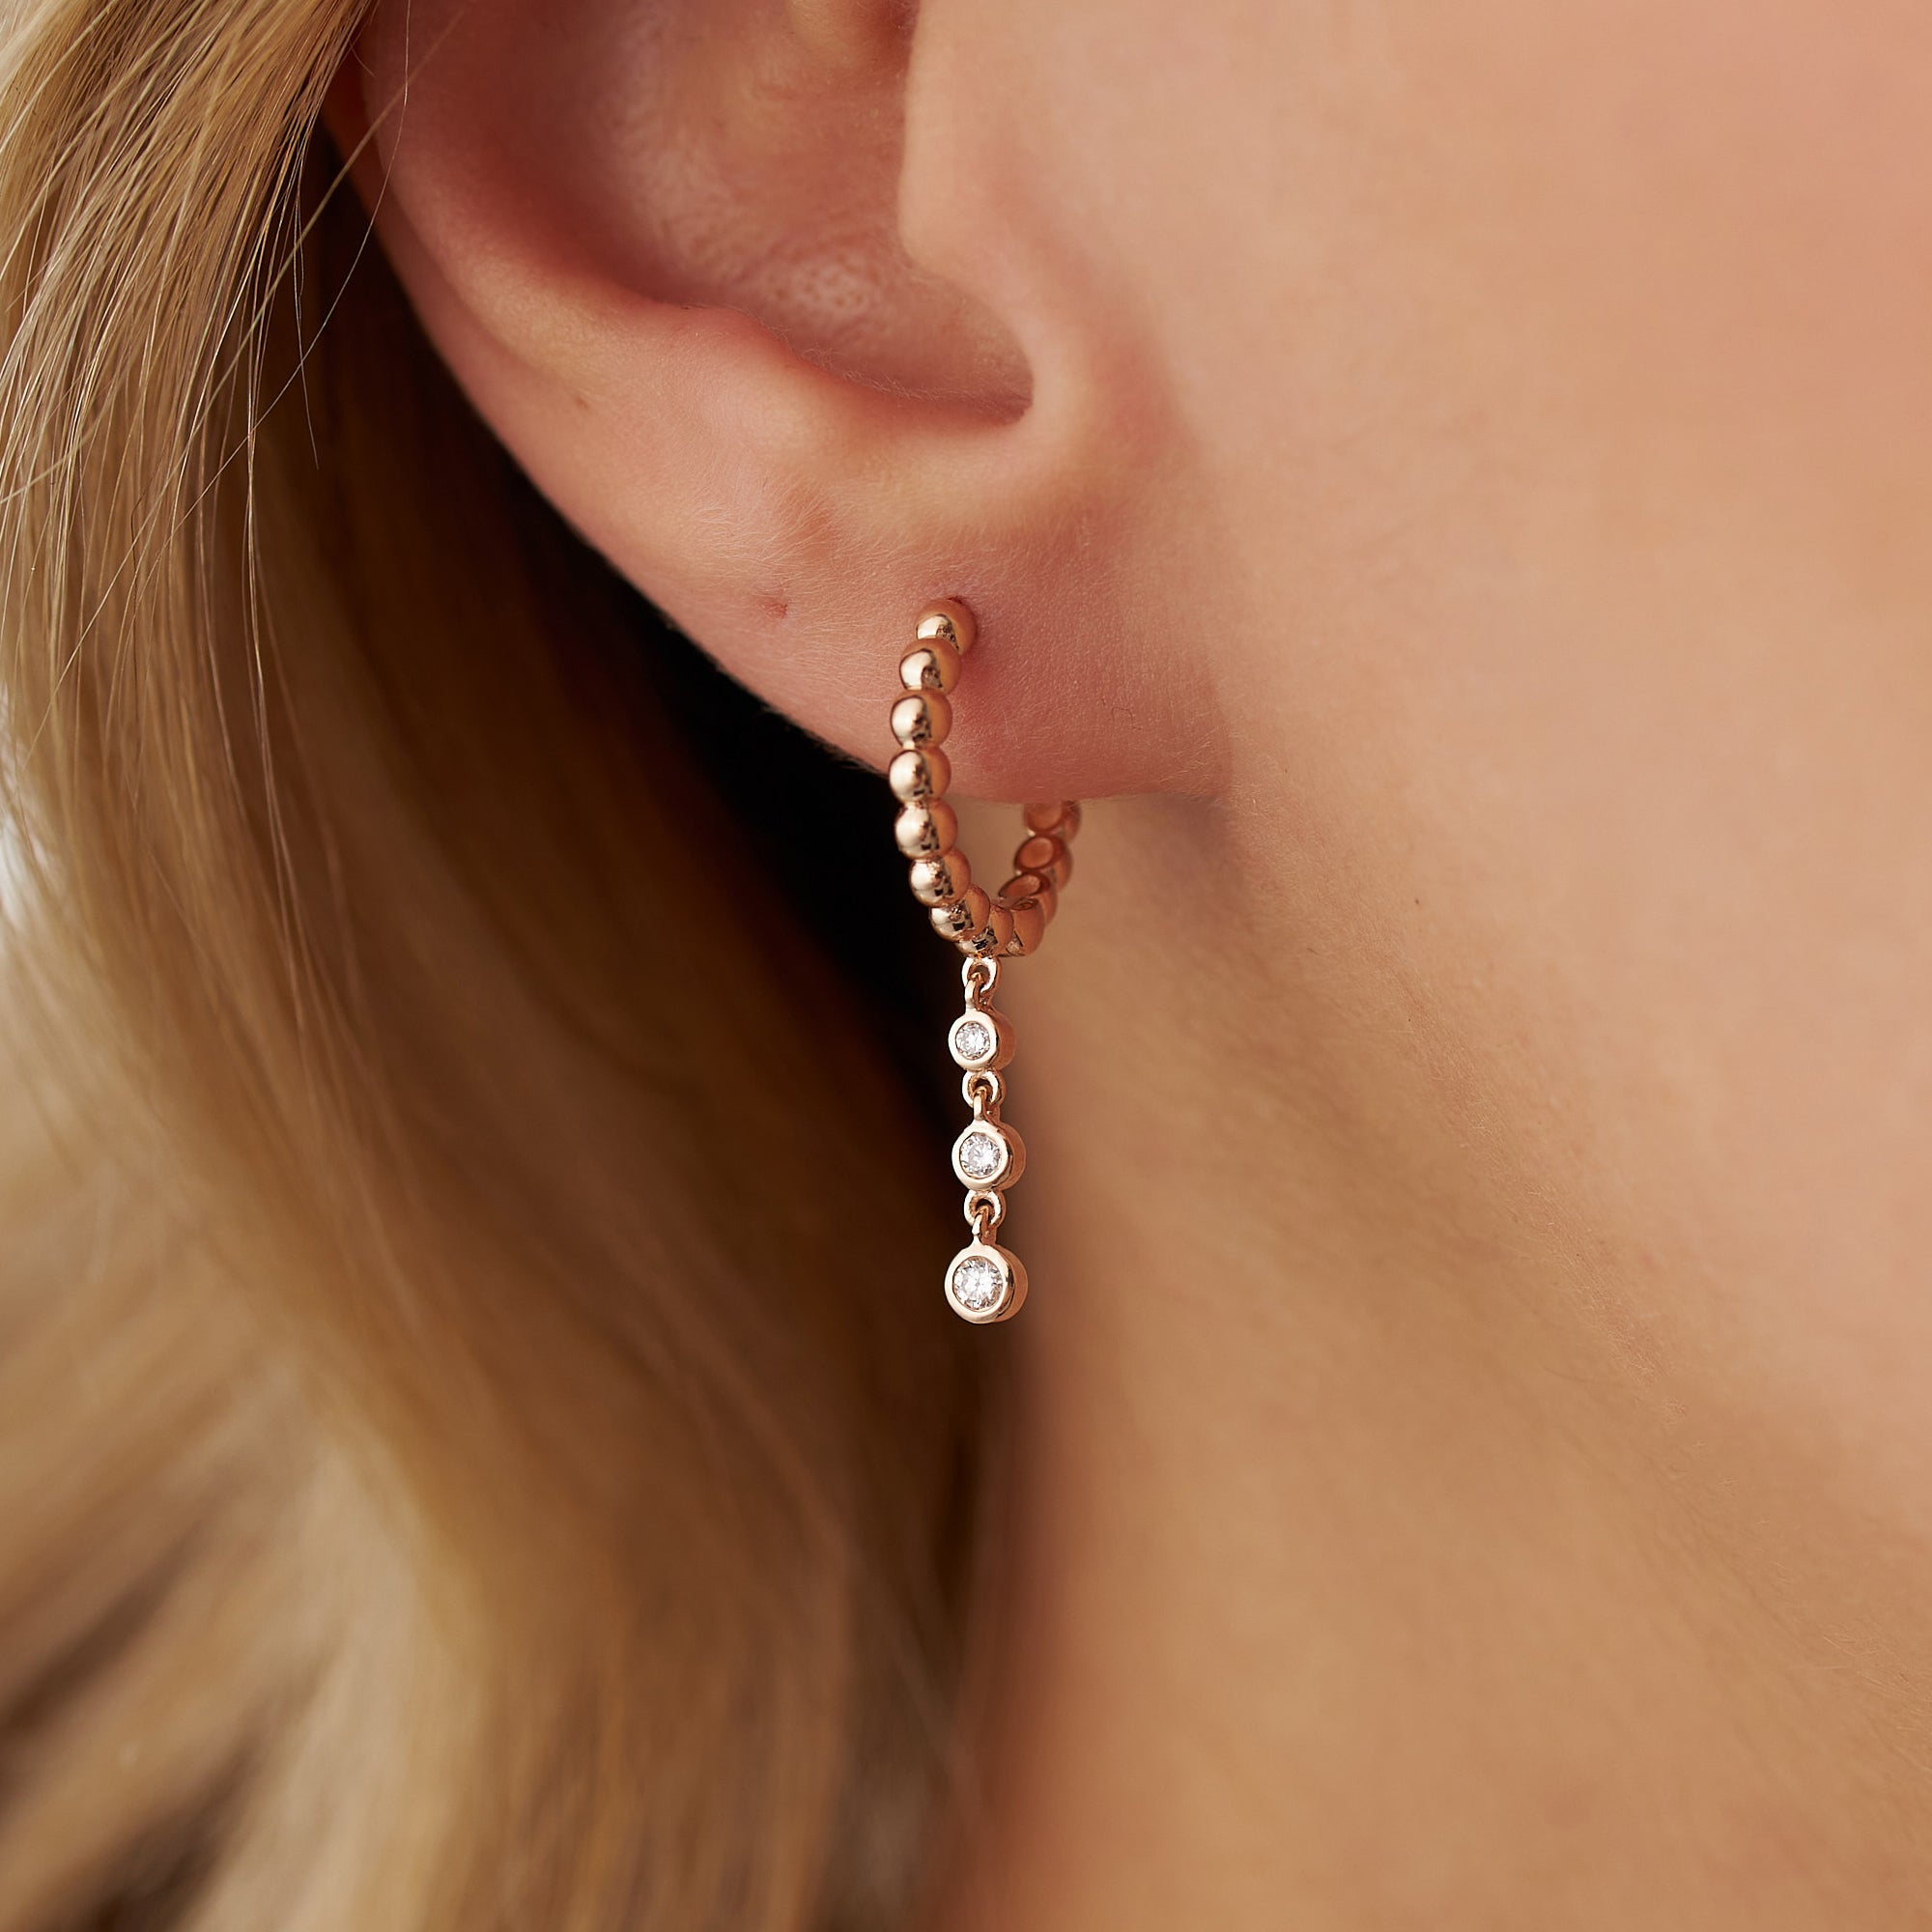 Beaded Diamond Drop Earrings Available in 14K and 18K Gold